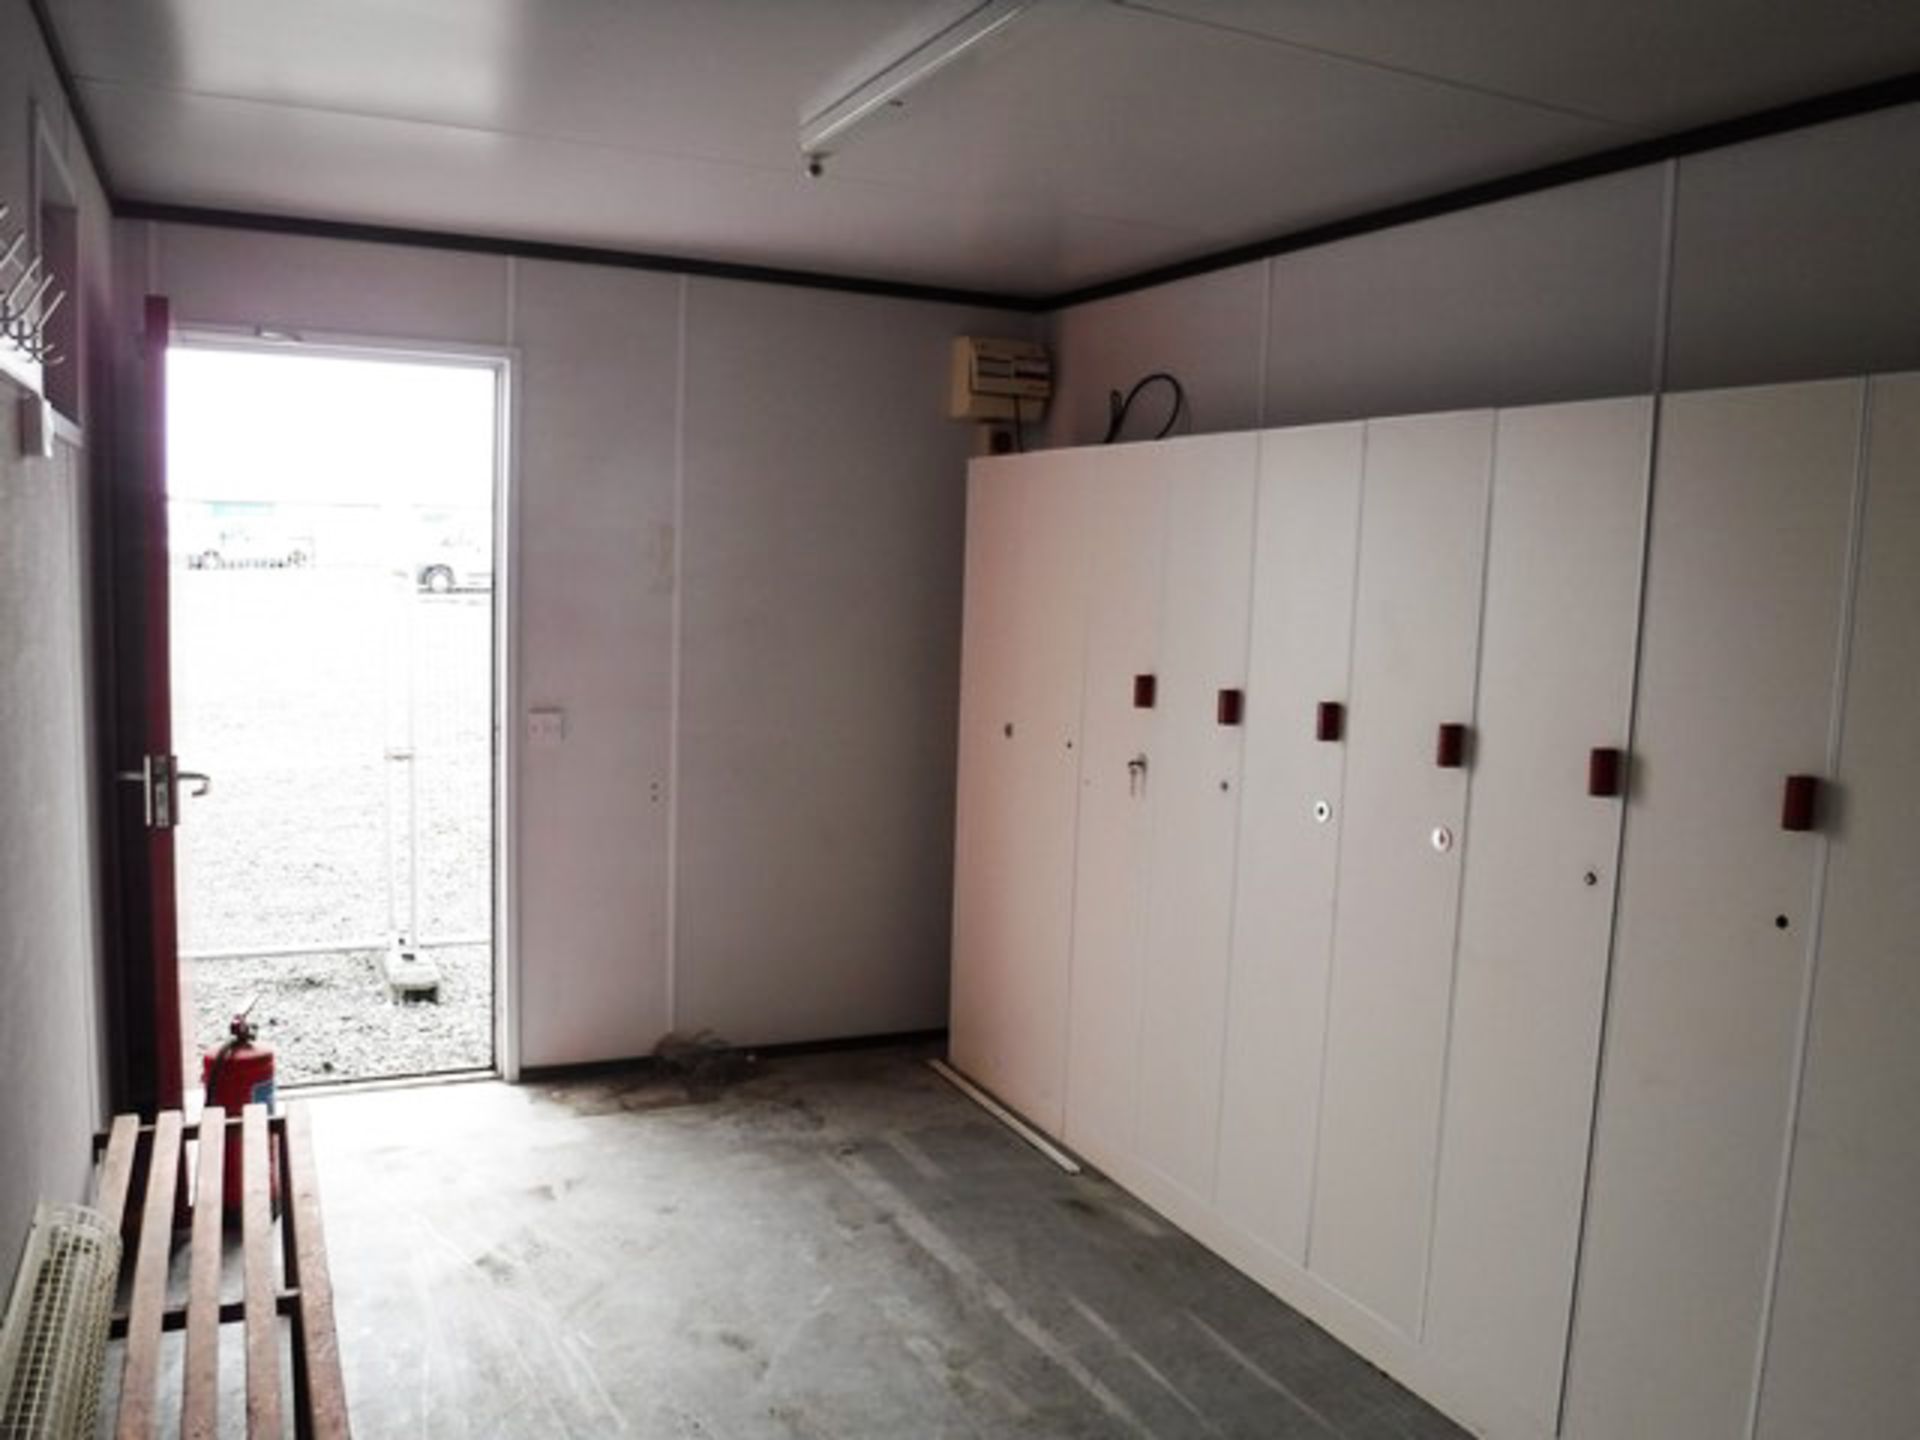 16FT X 9FT USED LOCKER/DRYING CABIN, NO JACKLEGS - Image 5 of 6